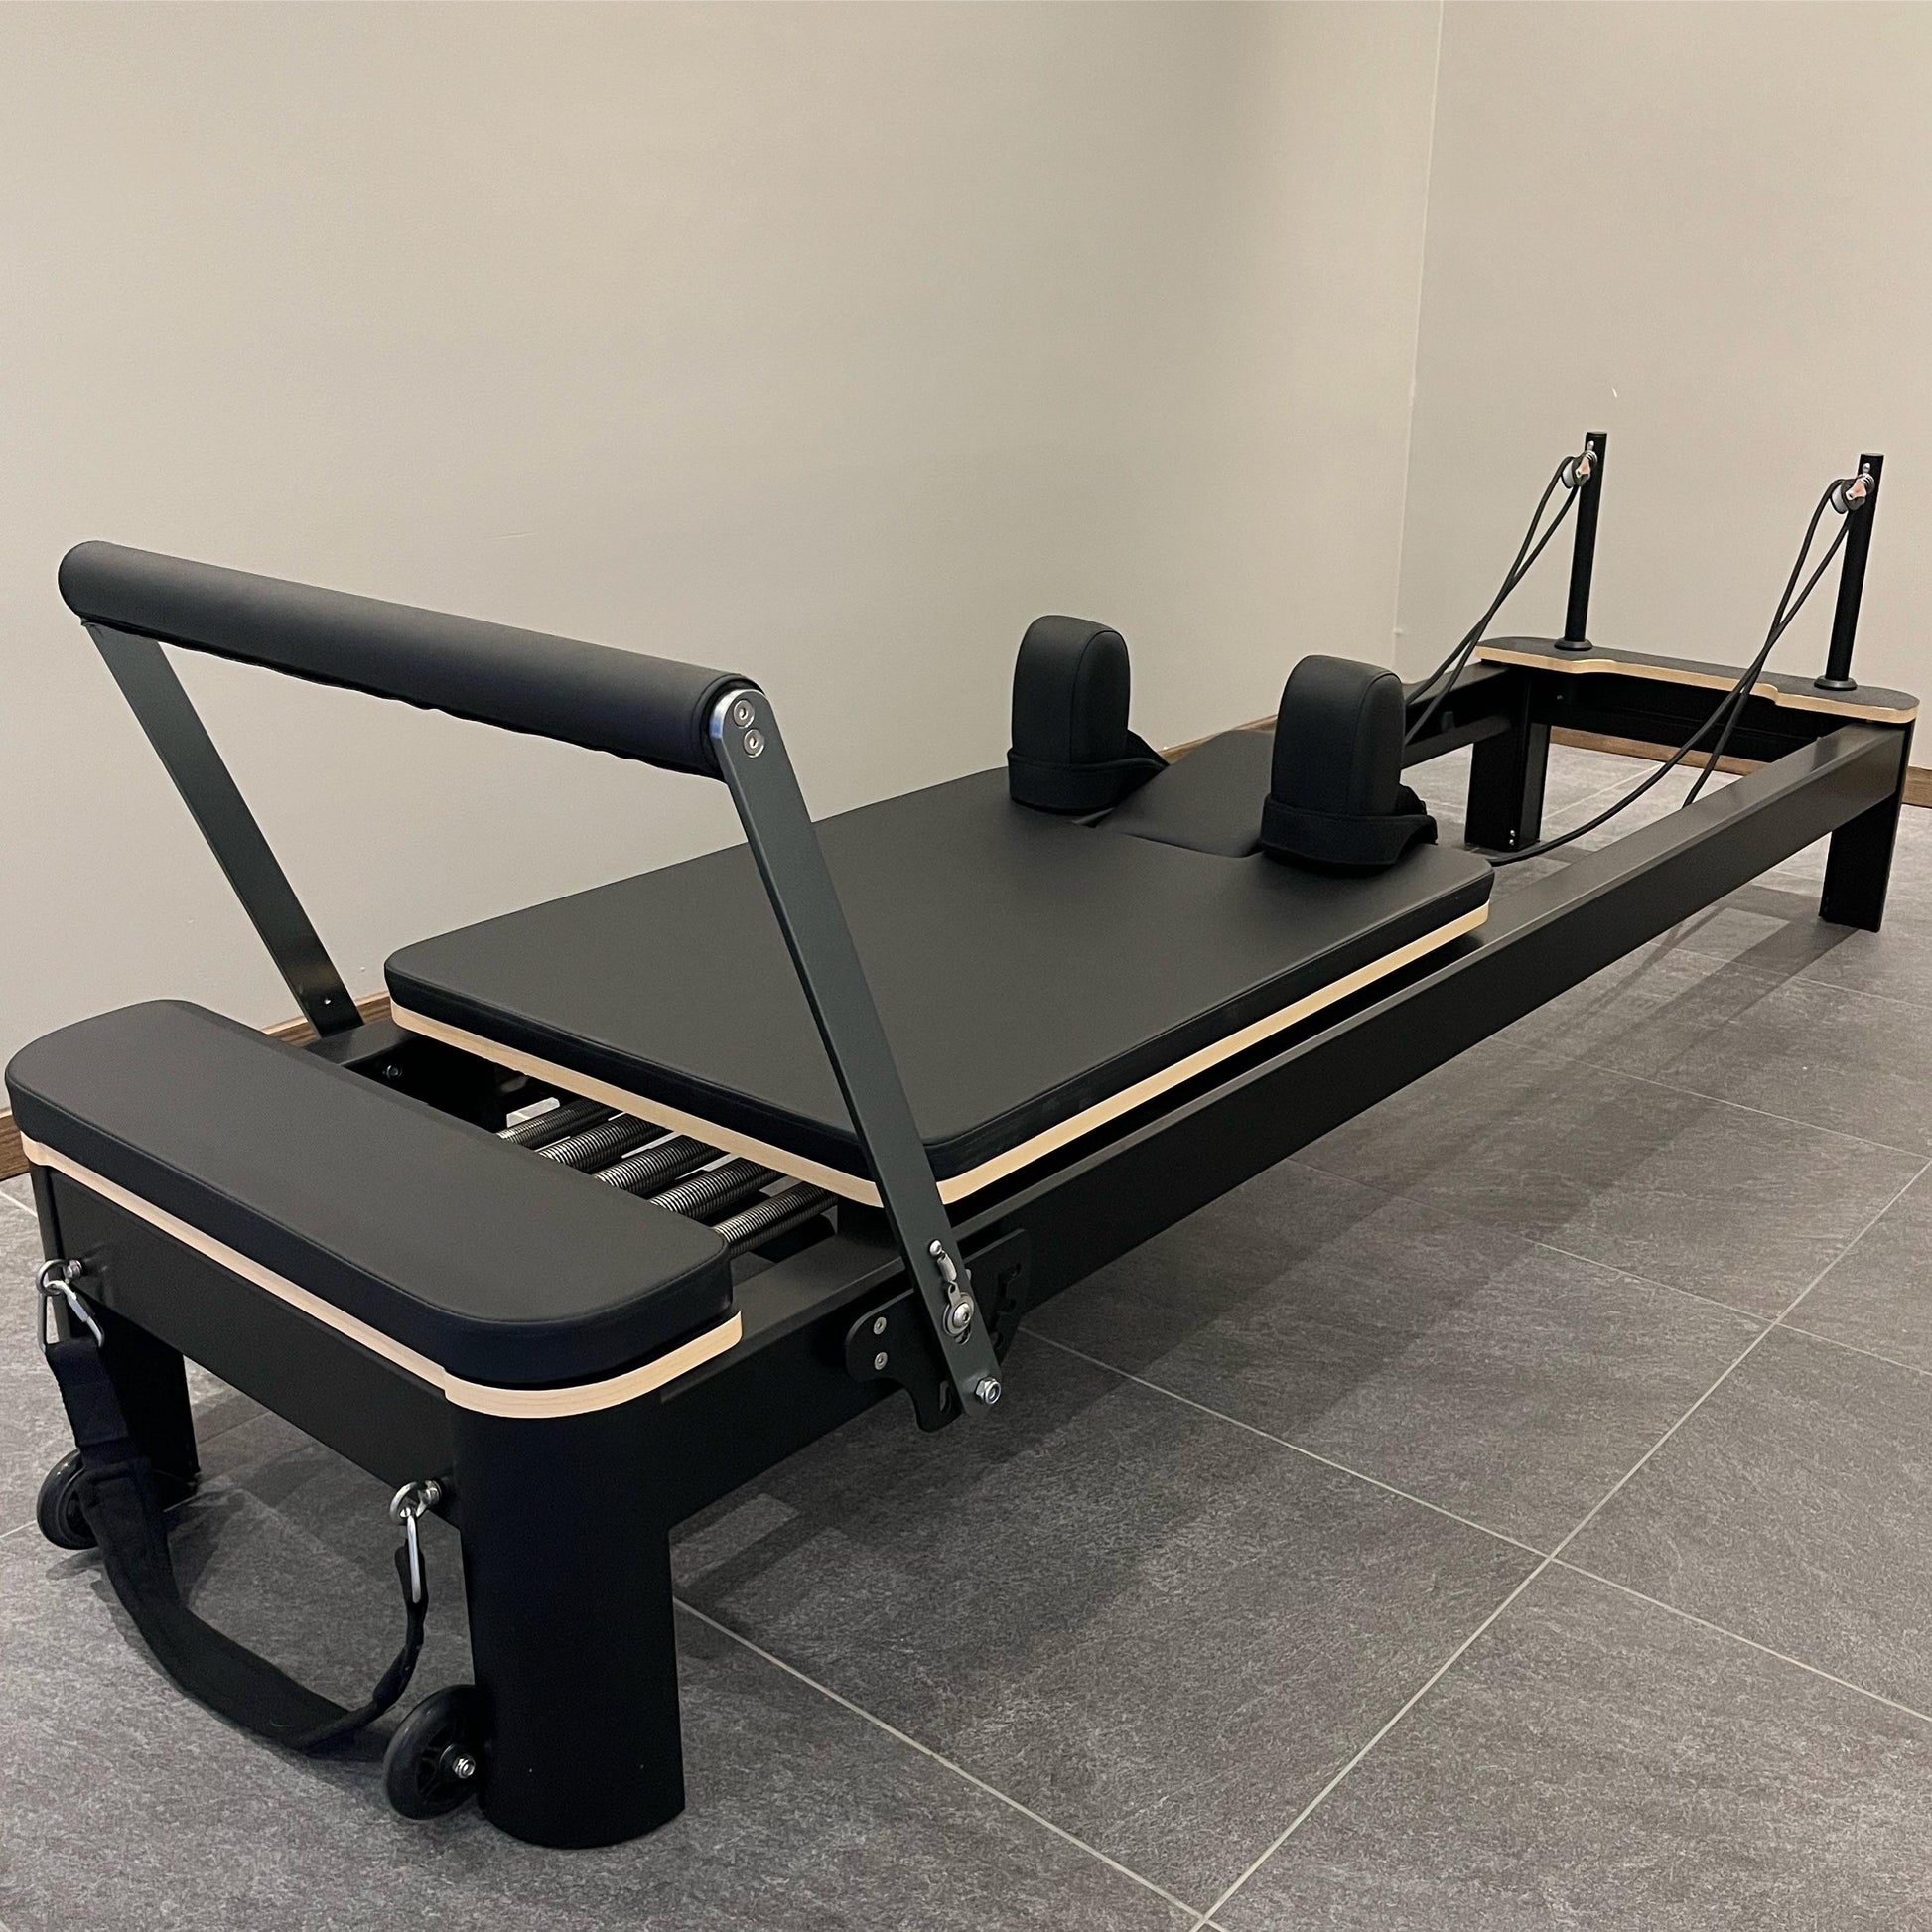 Find Custom and Top Quality Pilates Reformer Box for All 